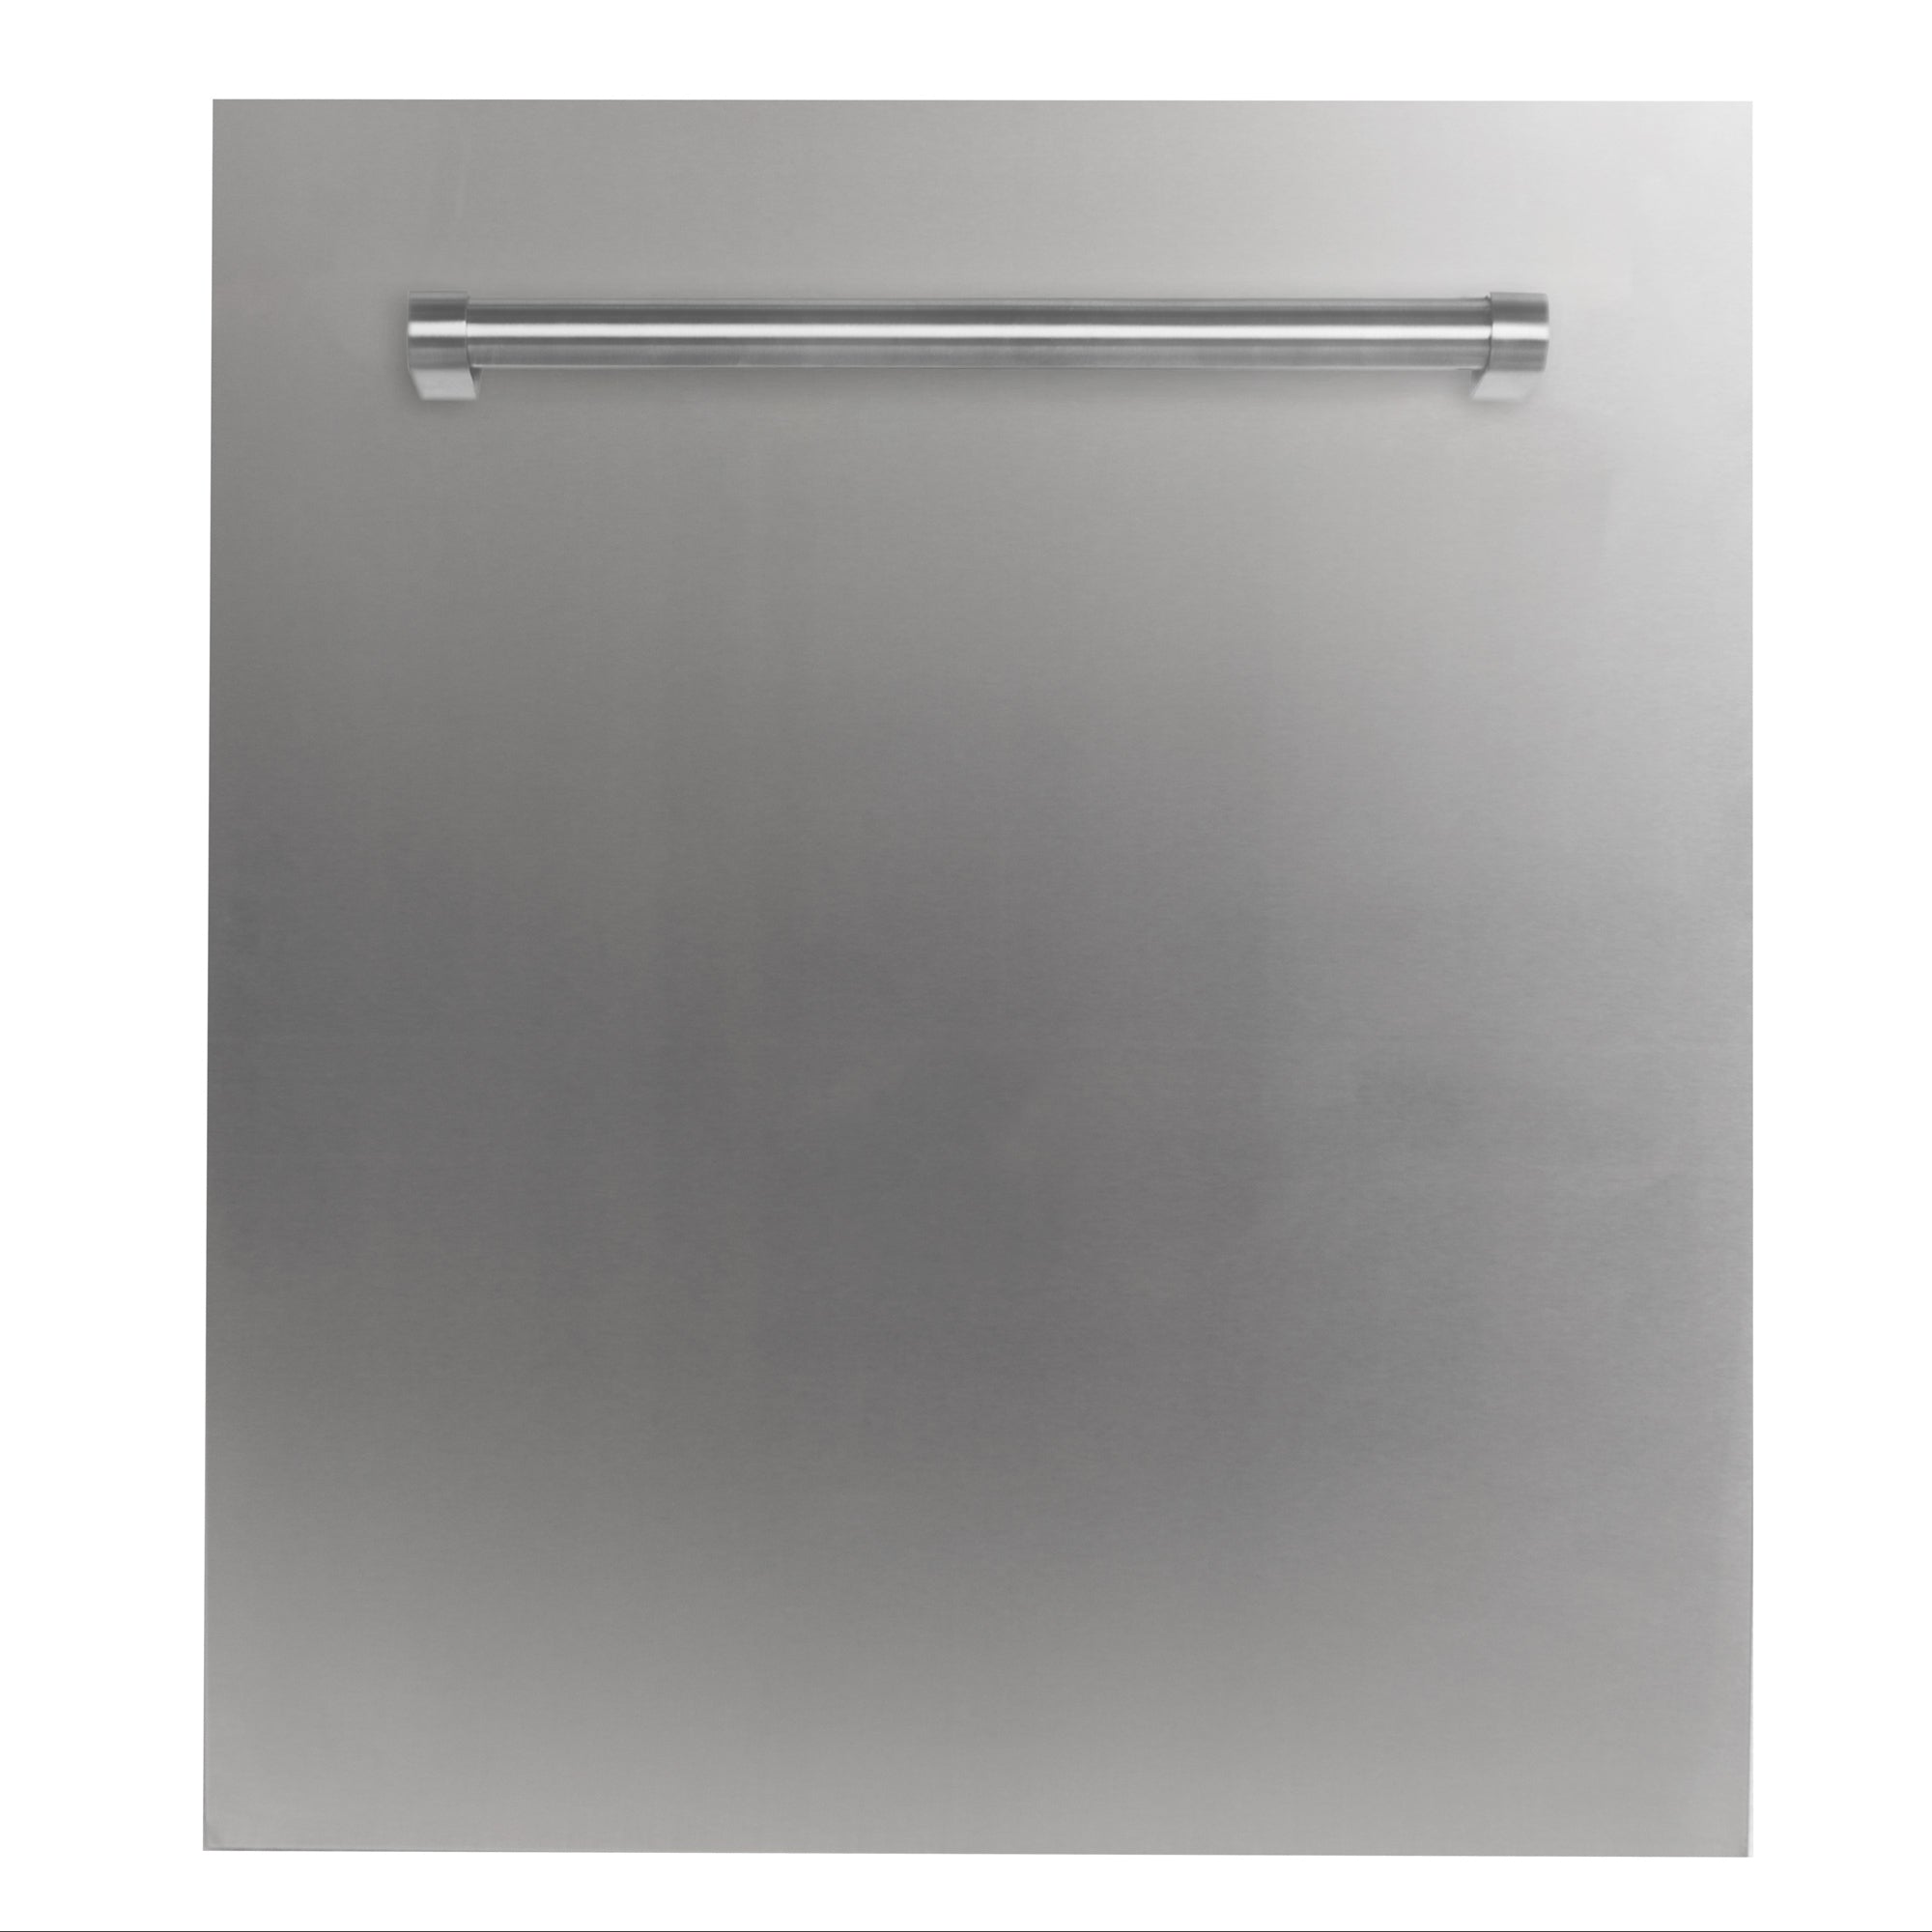 ZLINE 24" Dishwasher Panel in Stainless Steel with Traditional Handle (DP-304-H-24)